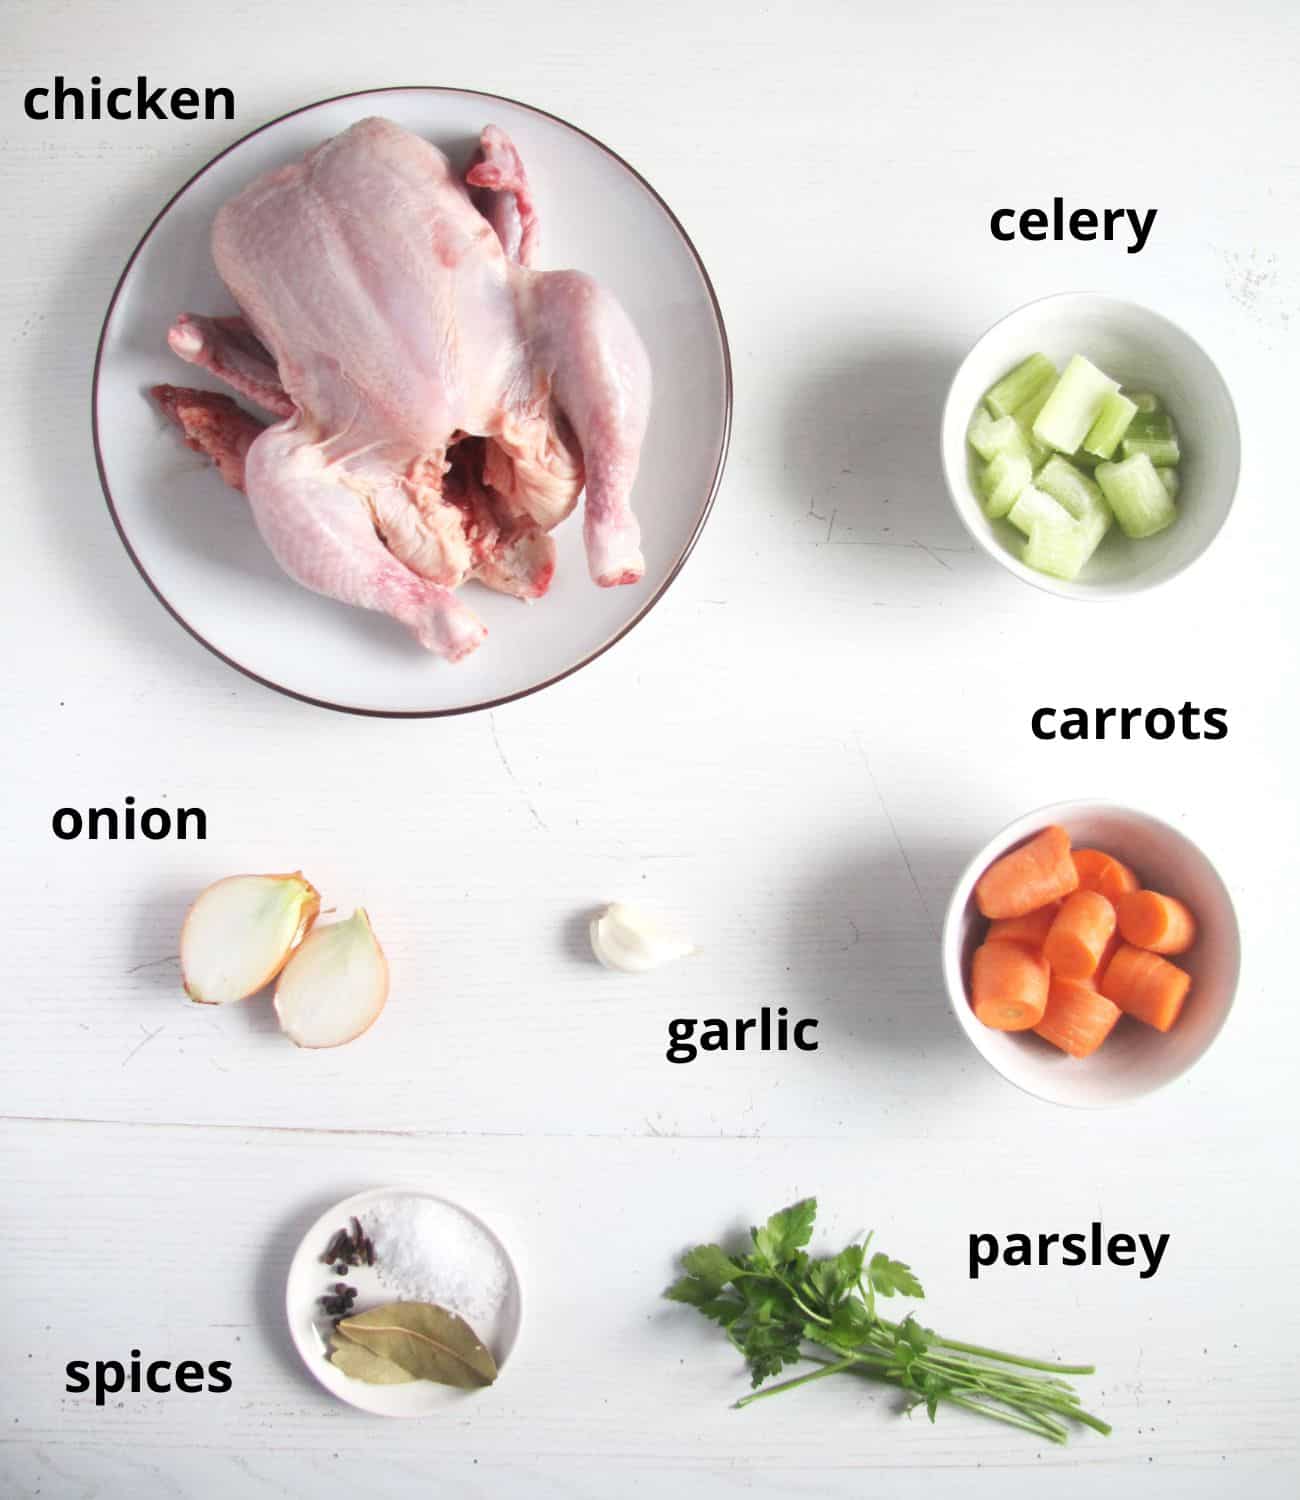 bowls with whole chicken, celery, onion, carrots, parsley and spices.